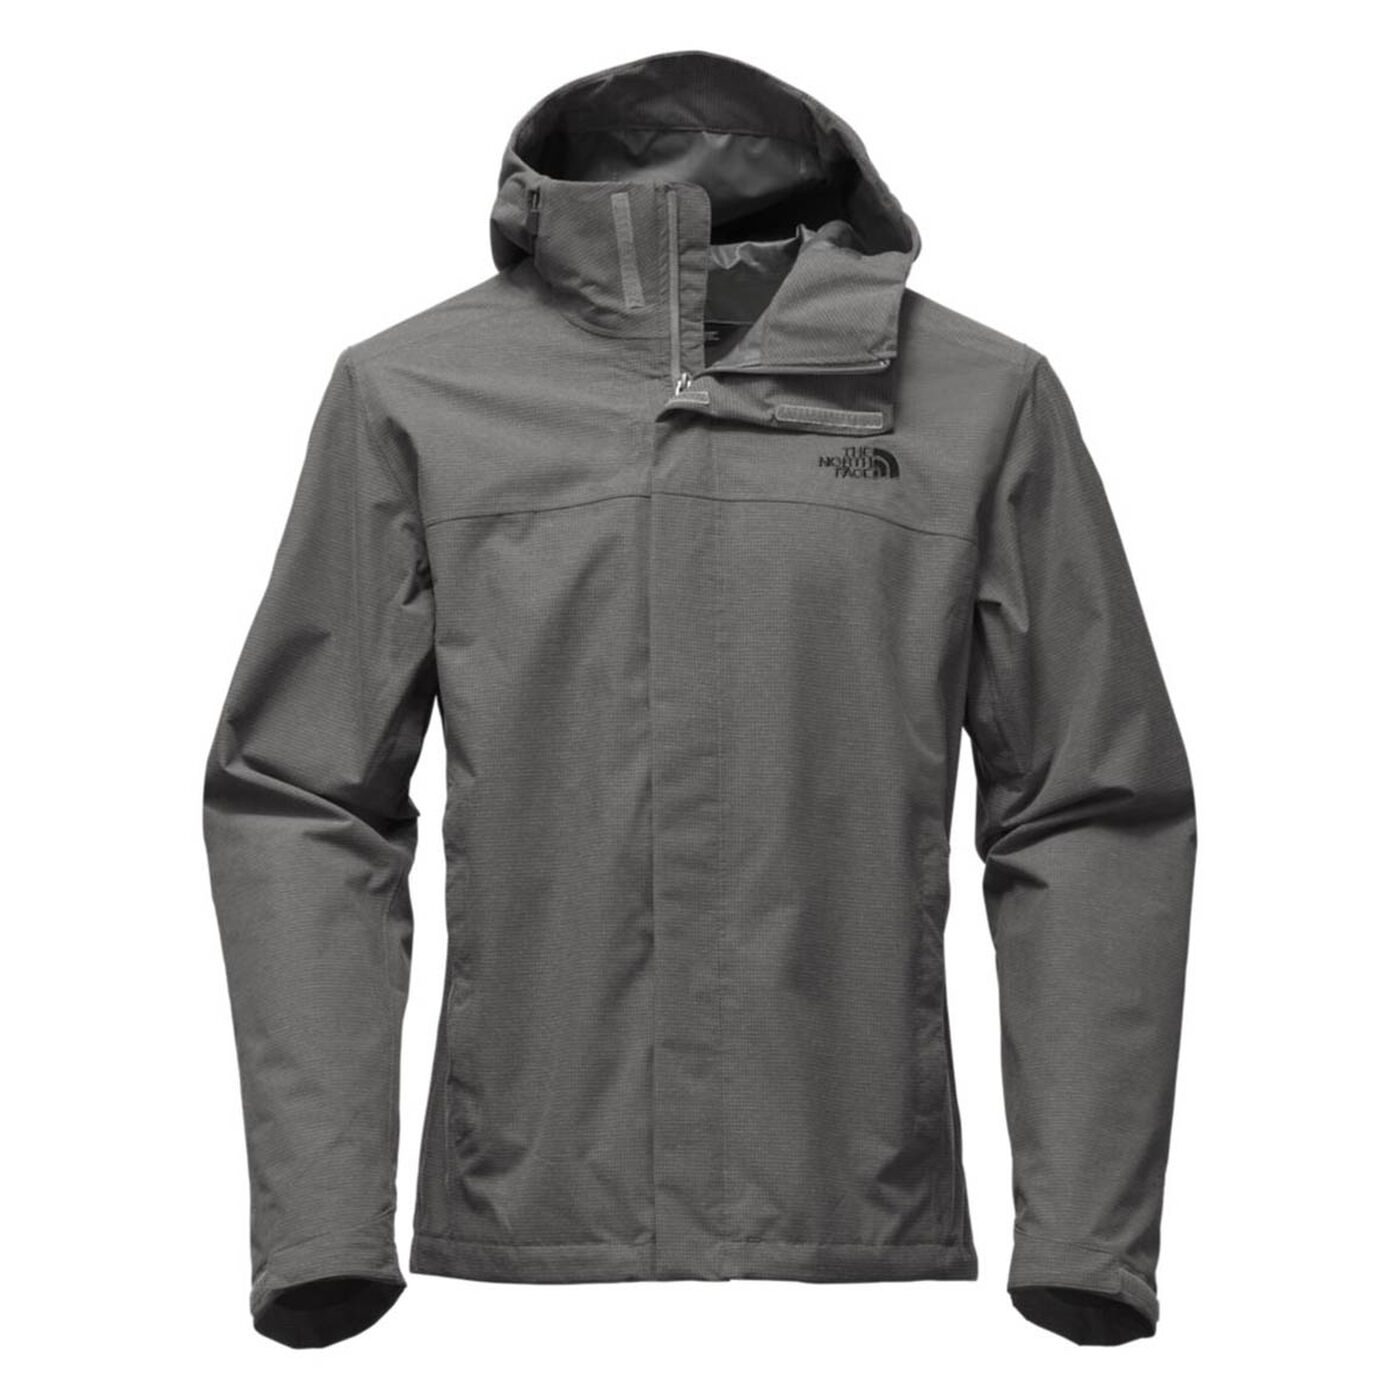 Men's Venture 2 Jacket | The North Face | Sporting Life Online